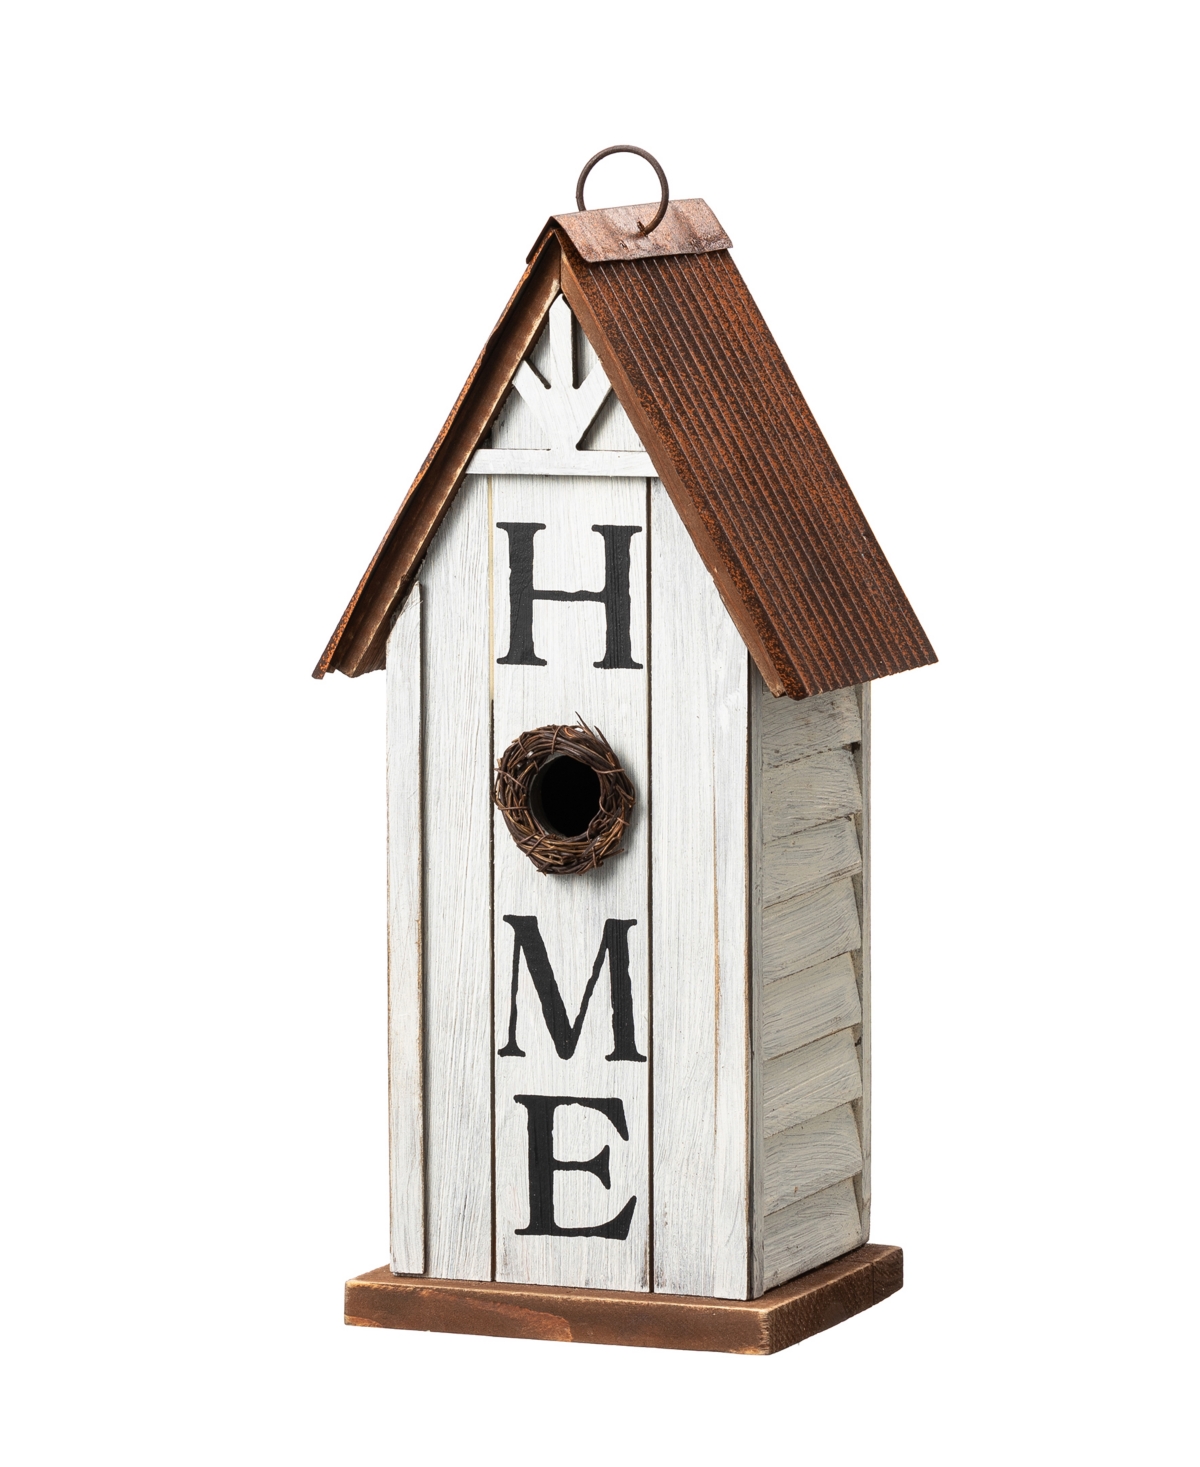 14.75" H Washed White Distressed Solid Wood " Home" Inspiration Decorative Outdoor Garden Birdhouse - Multi